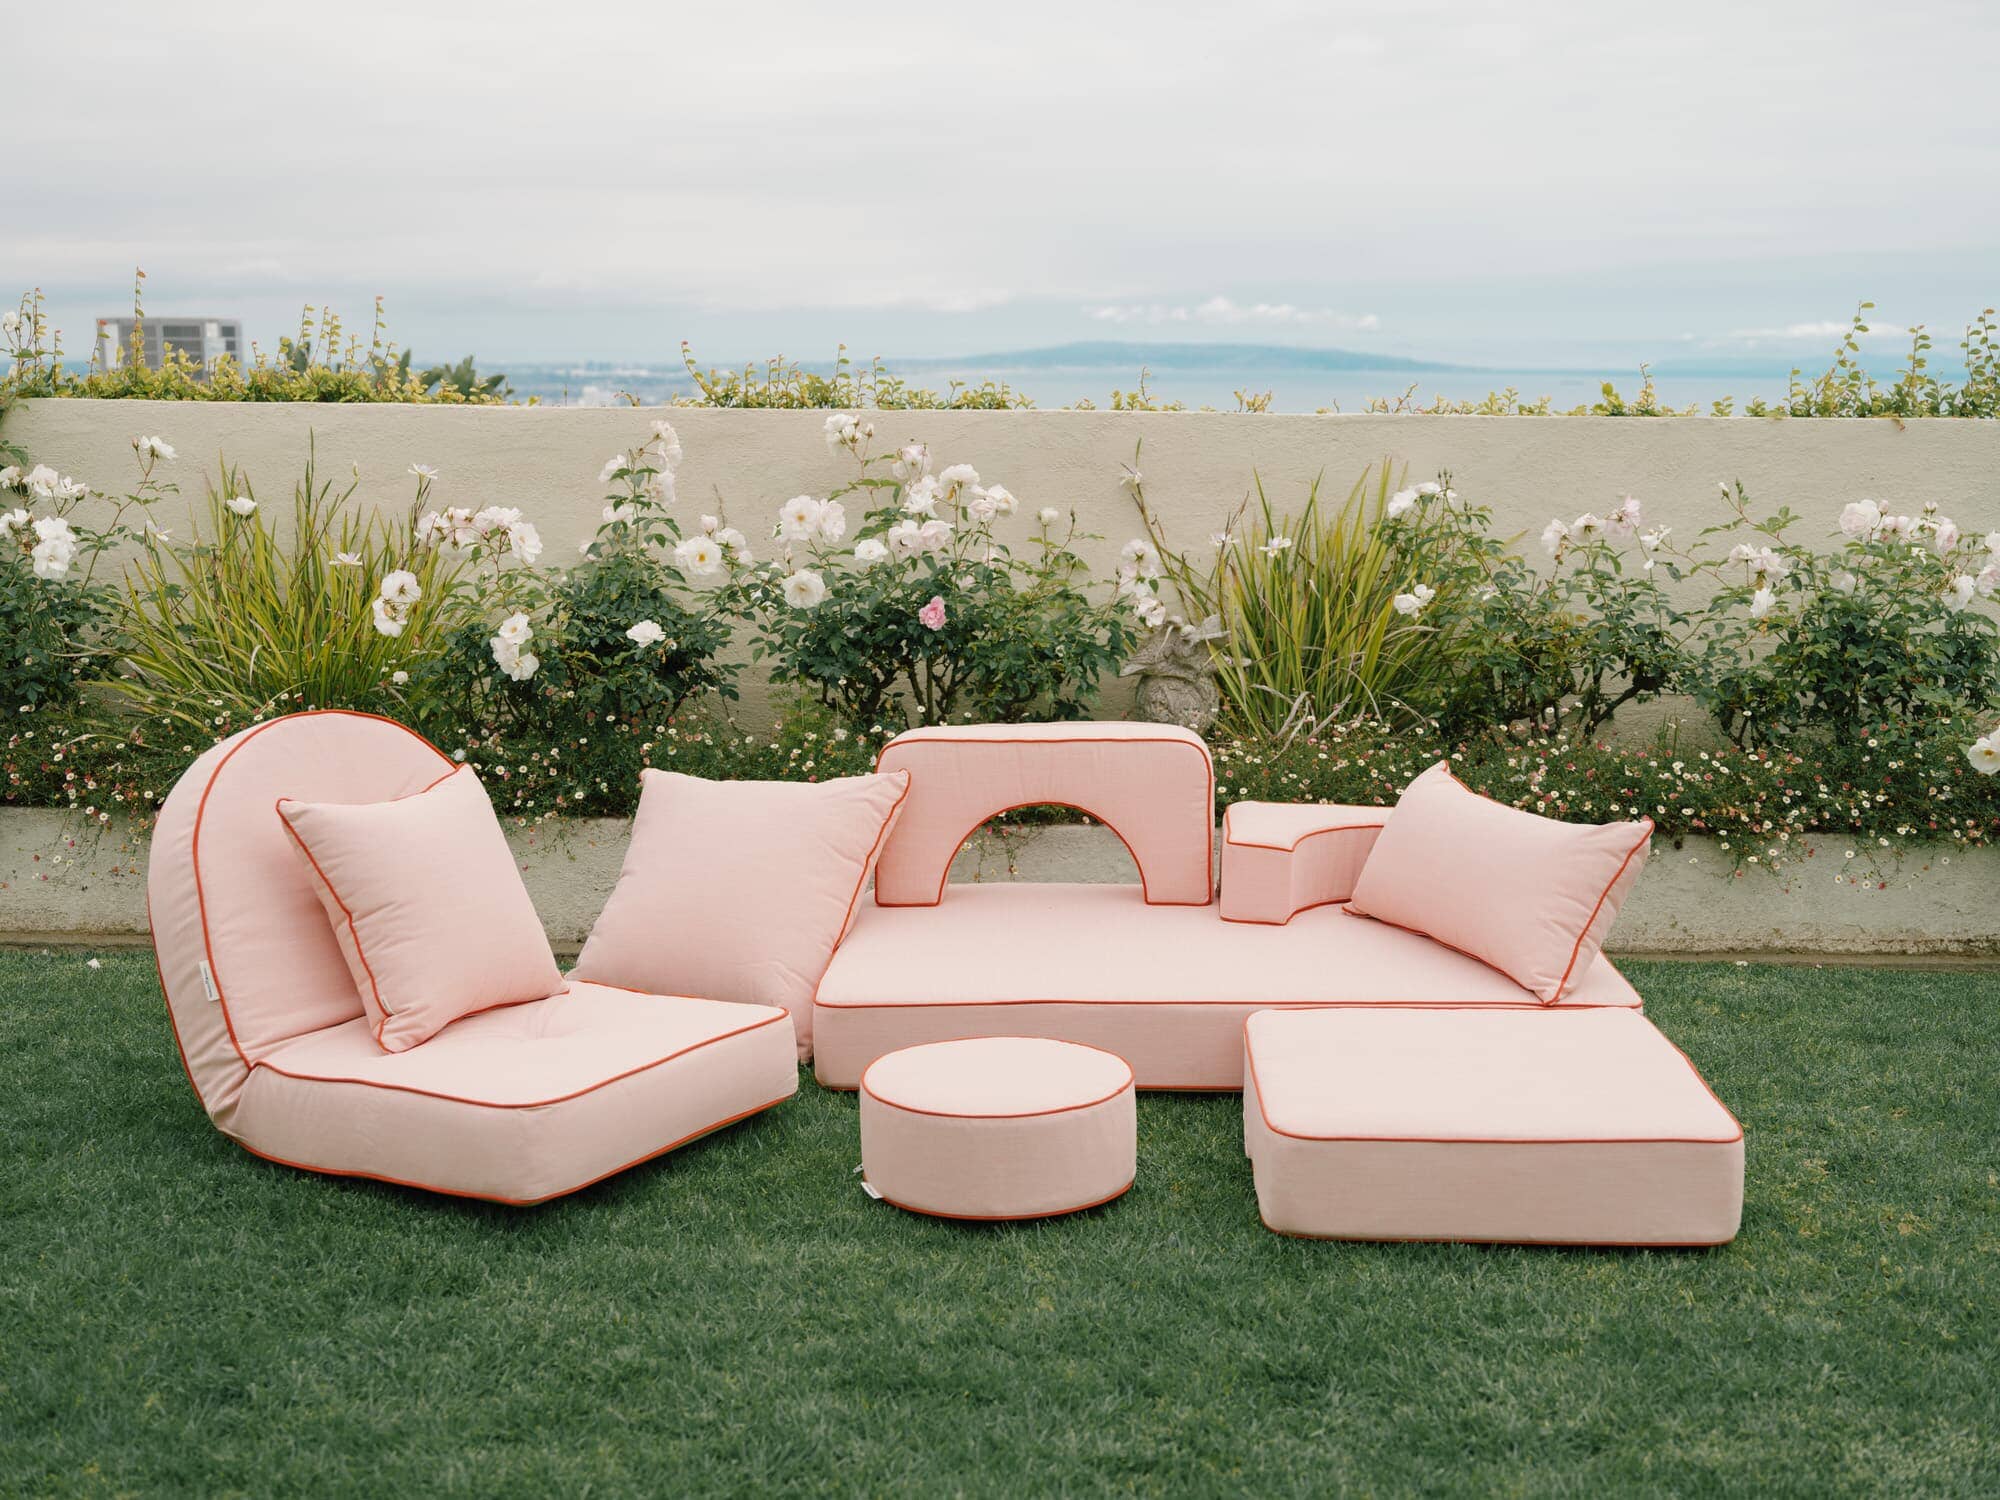 Pink outdoor cushions on grass area